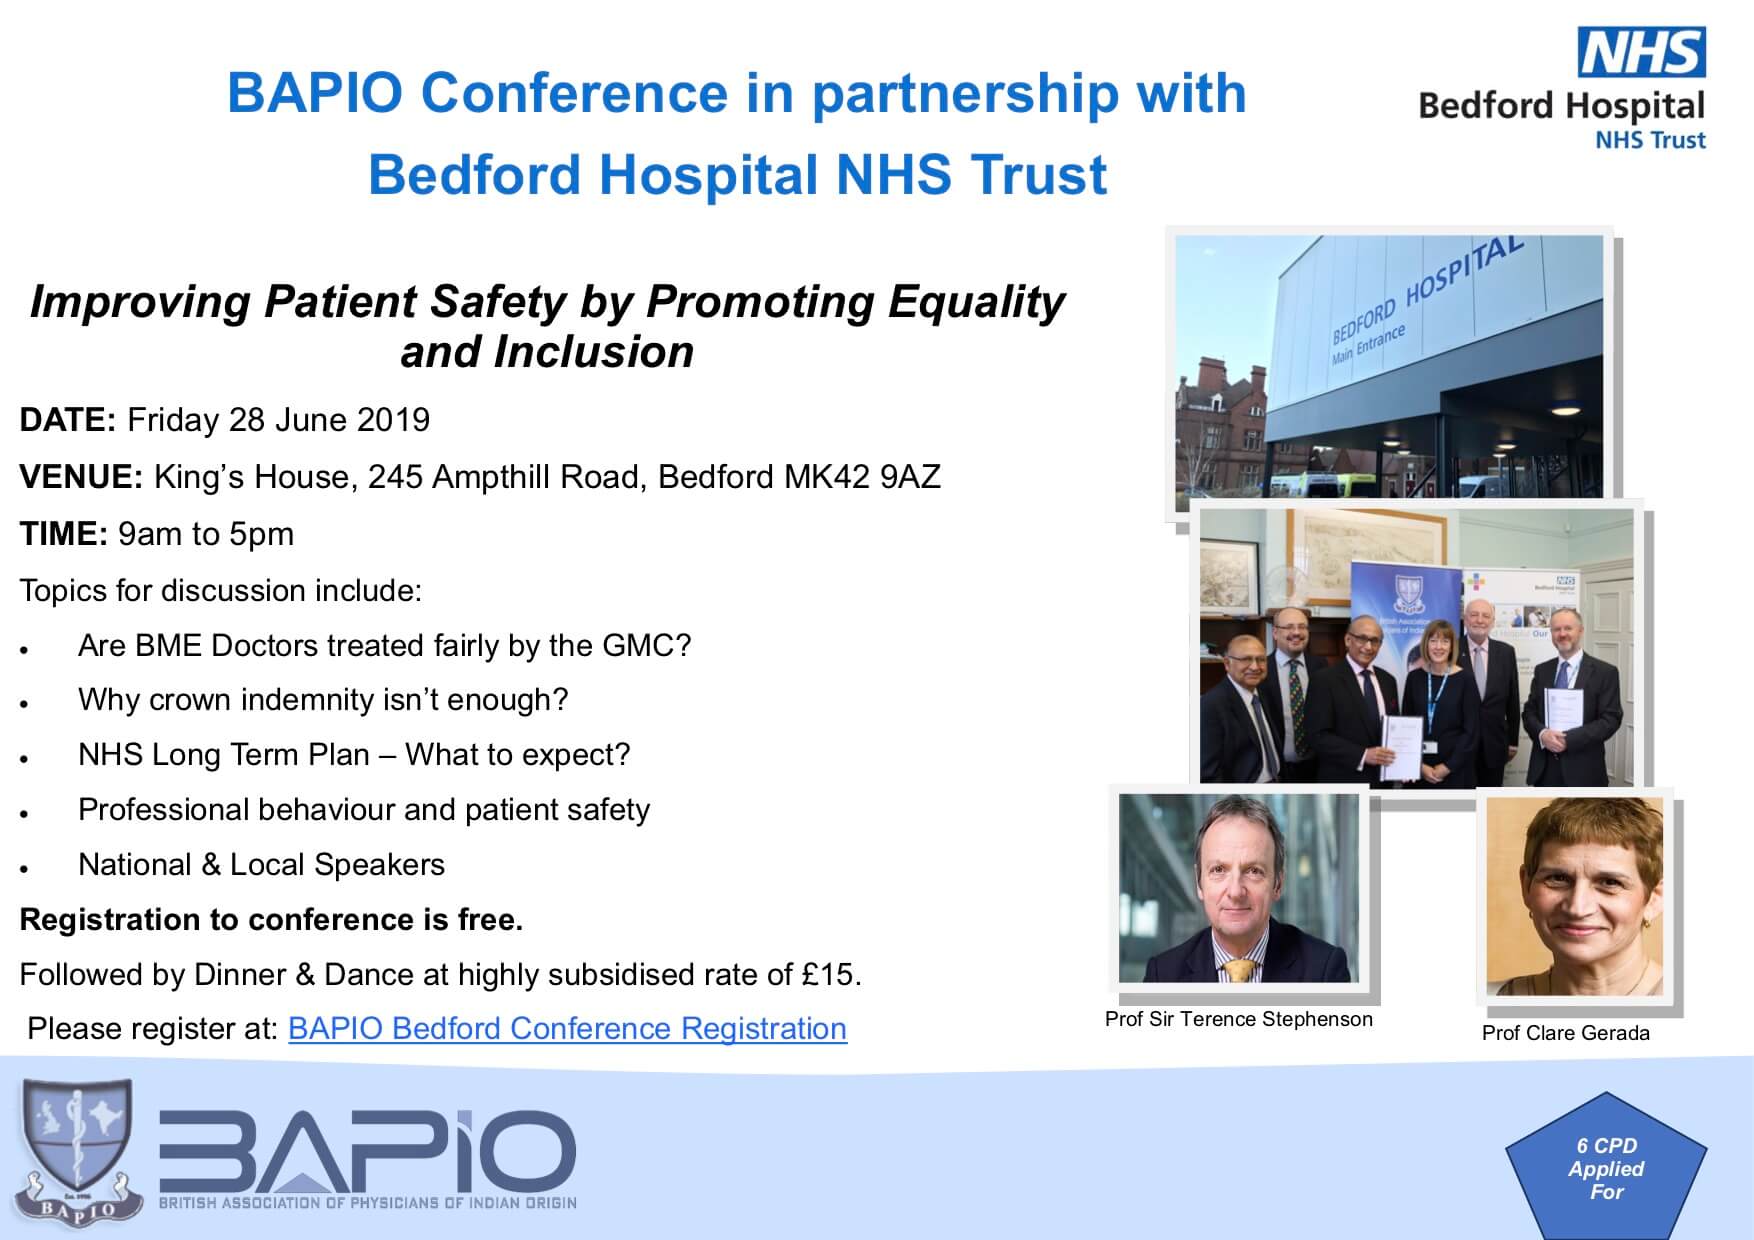 Bapio Conference in Partnership with Bedford Hospital NHS Trust- 28th June